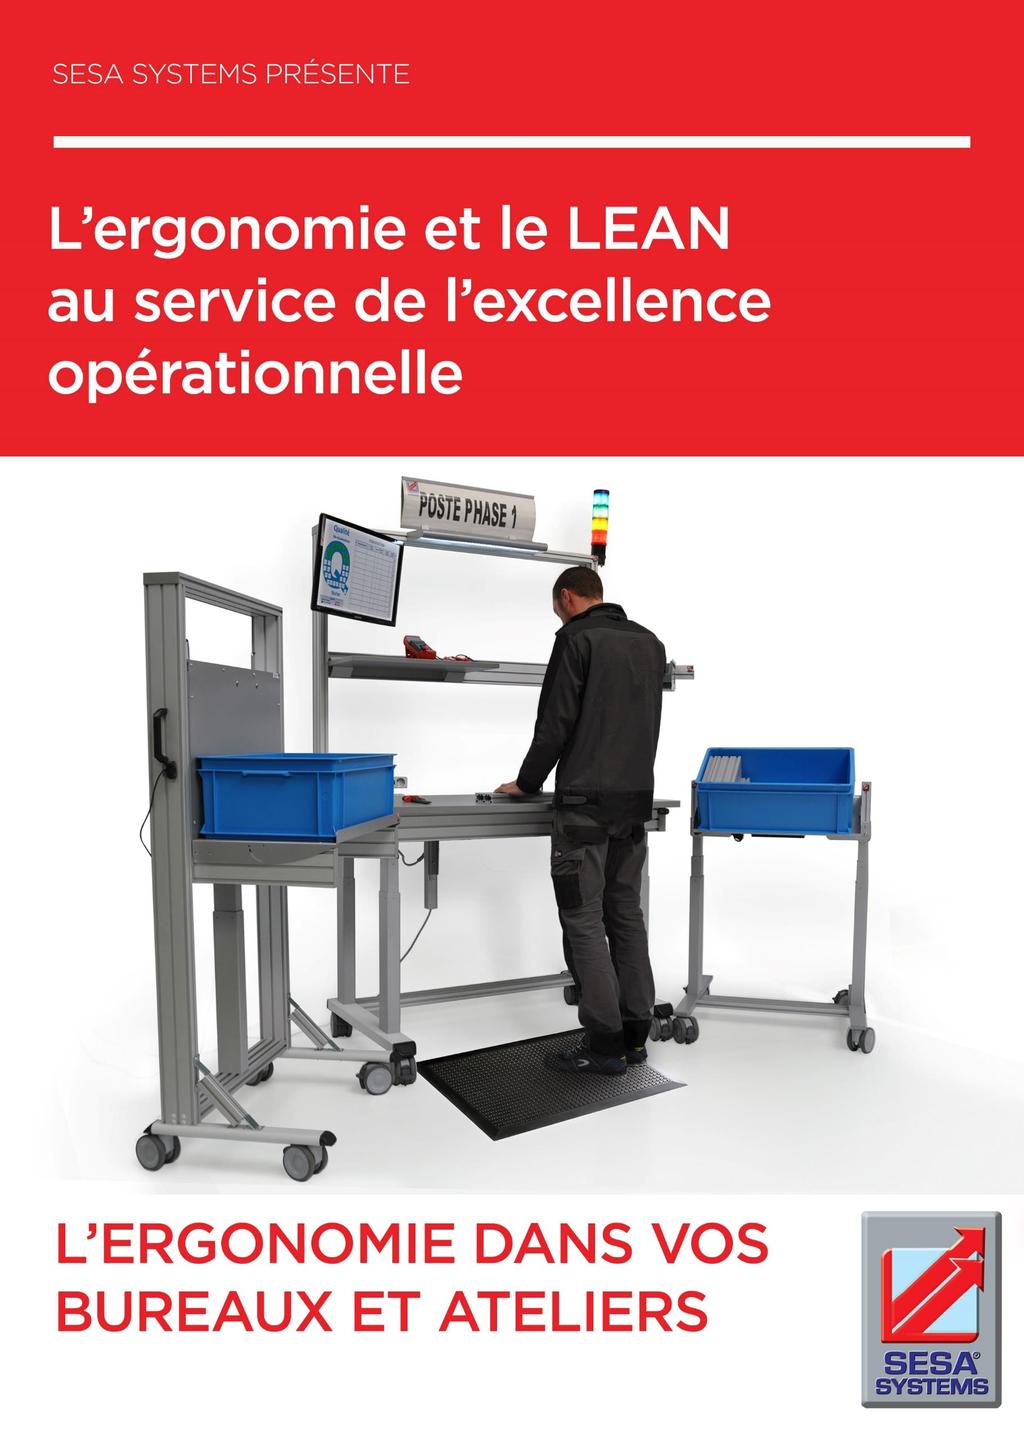 SESA SYSTEMS PRESENTS Ergonomics and LEAN in the Service of